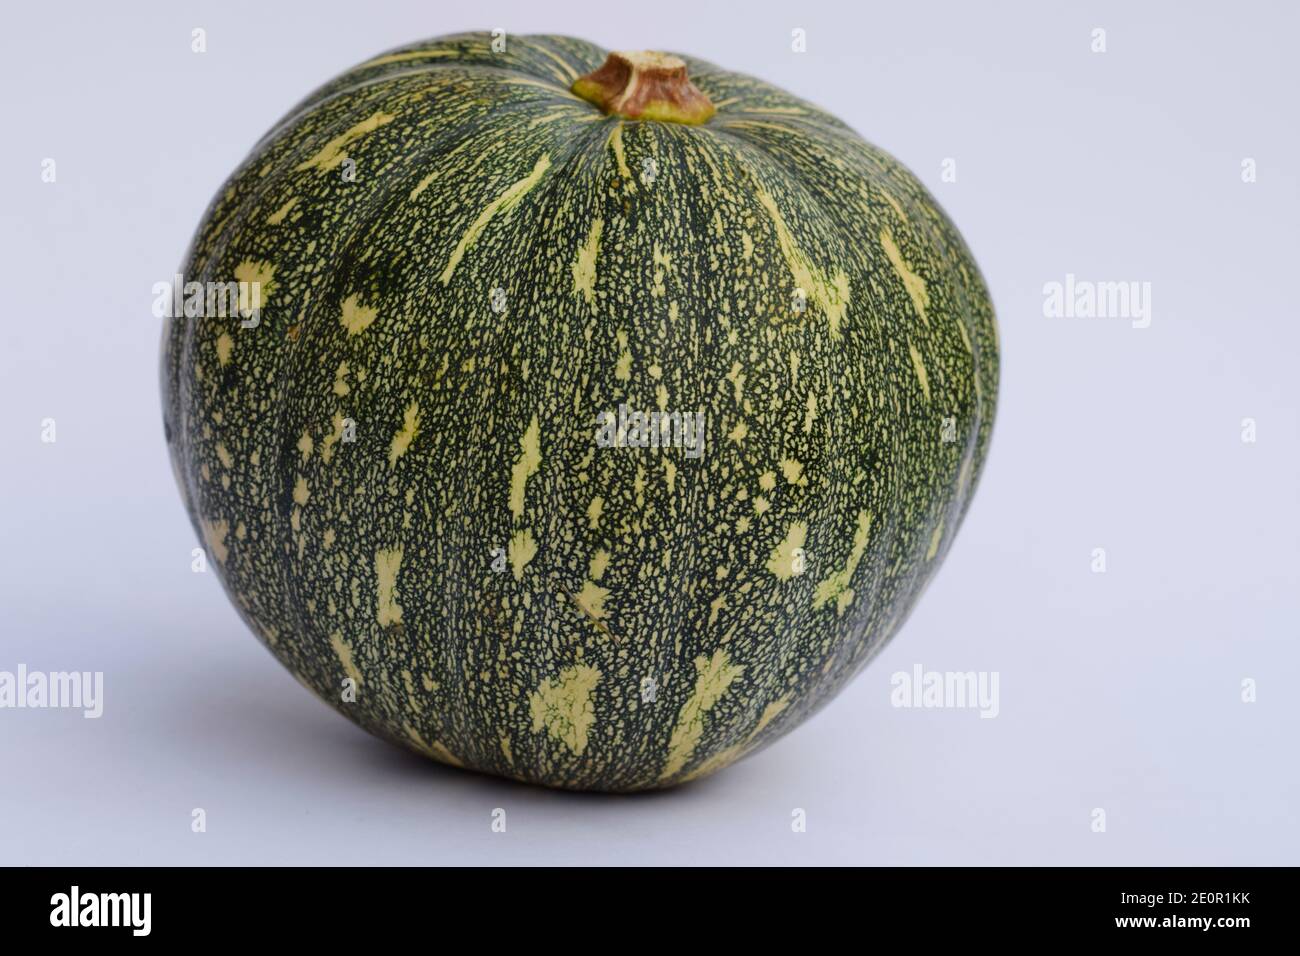 Pumpkin Raw Indan fruit also used as vegetable for lunch dinner curry preparation. . Green round pumpkin had yellow pulp inside. Indian fruit flowerin Stock Photo